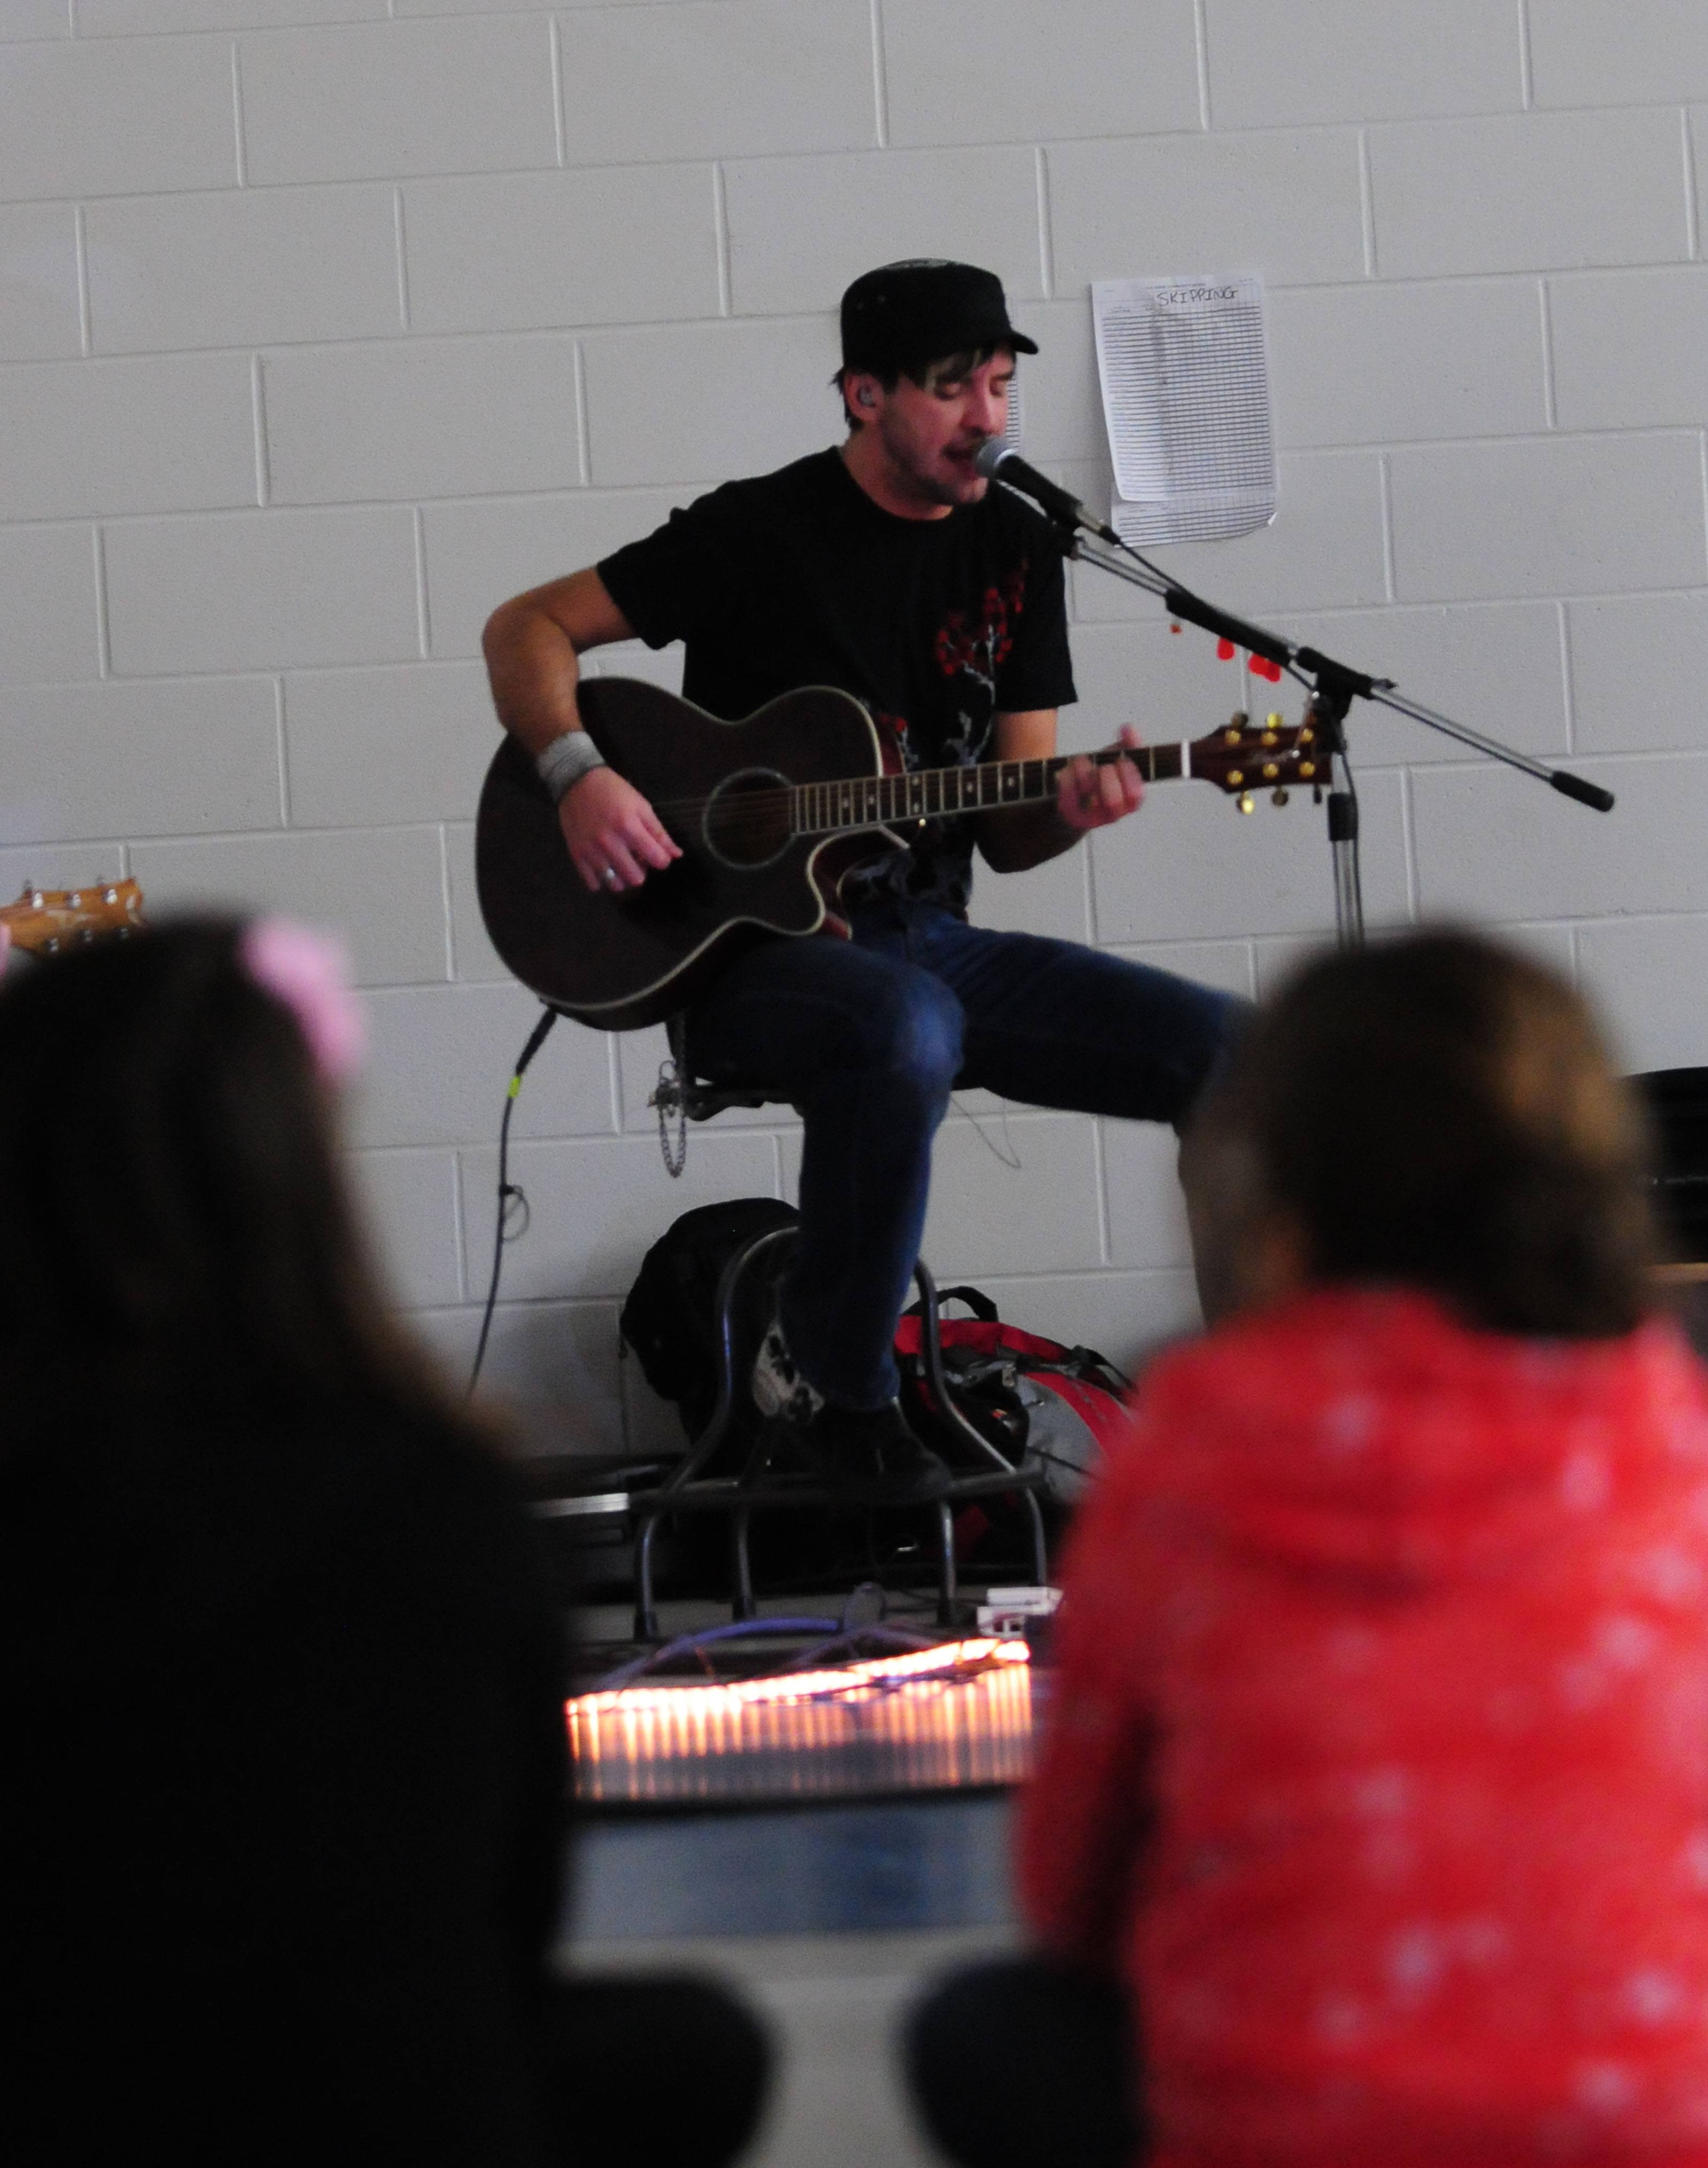 HOPEFUL MESSAGE—Singer Robb Nash brought his message of the importance of making positive choices to students at the G.H. Dawe School on Tuesday.